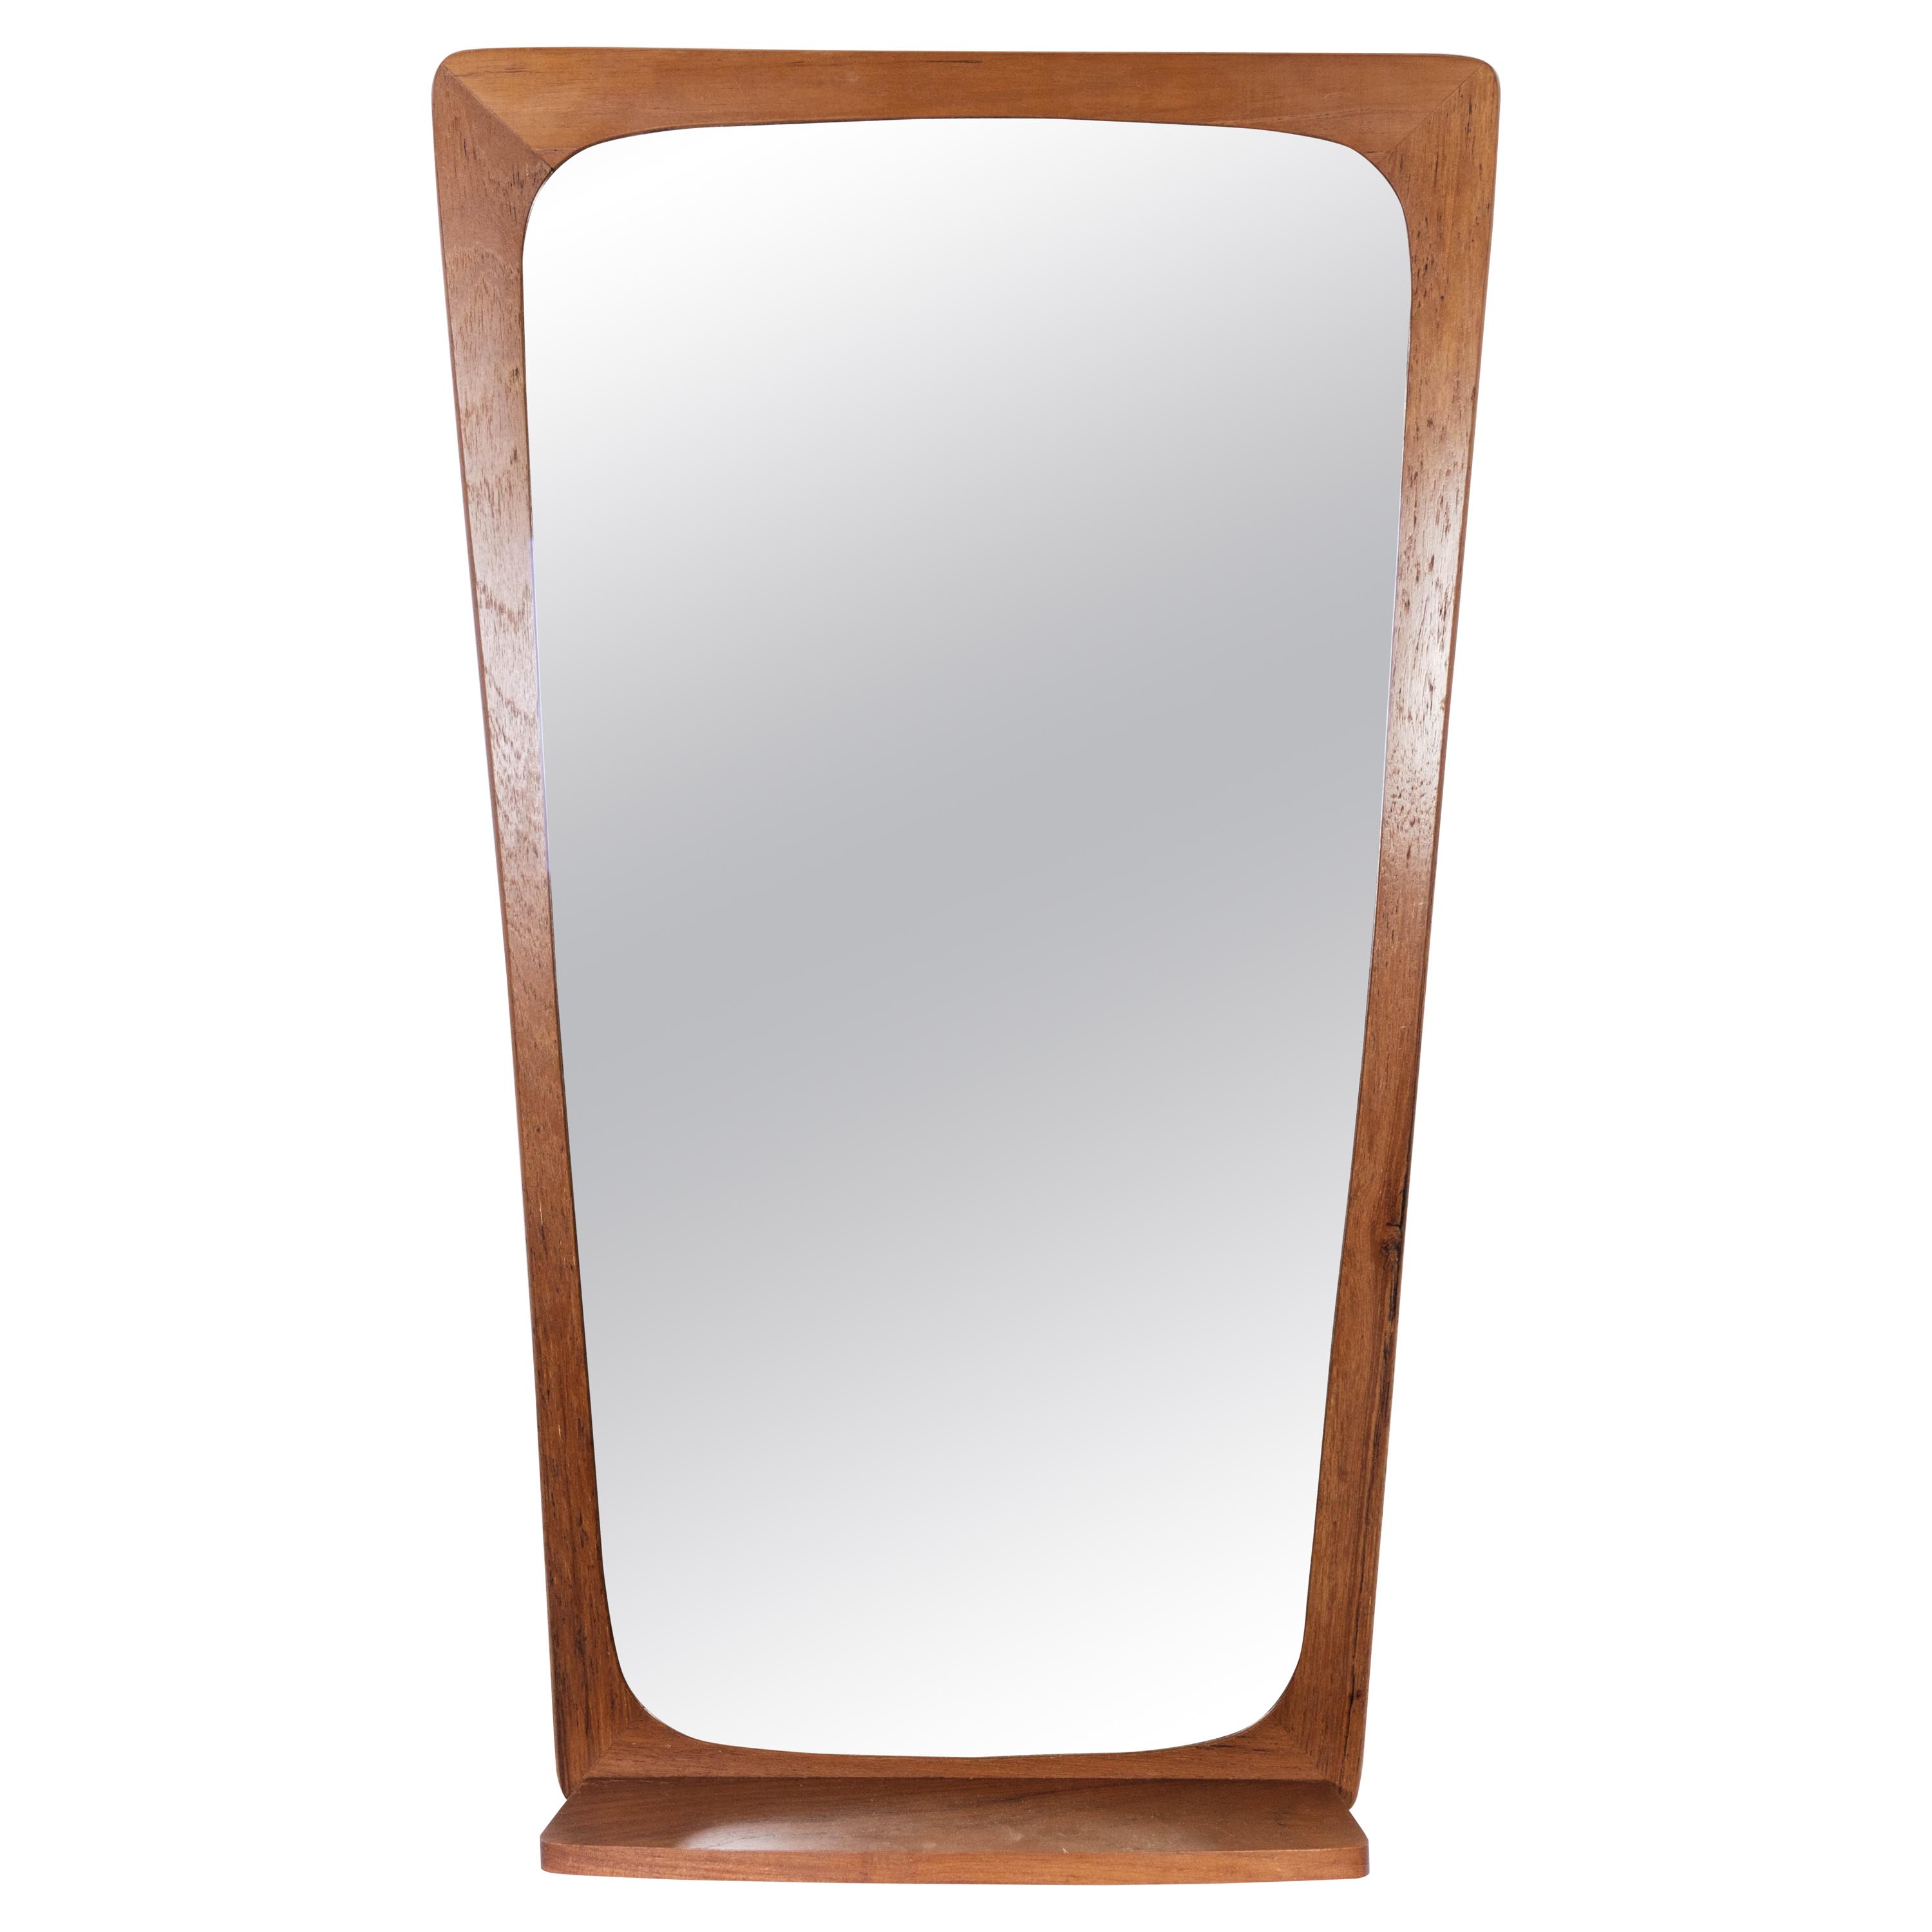 Mirror Made In Teak With Shelf, Danish Design From 1960s For Sale